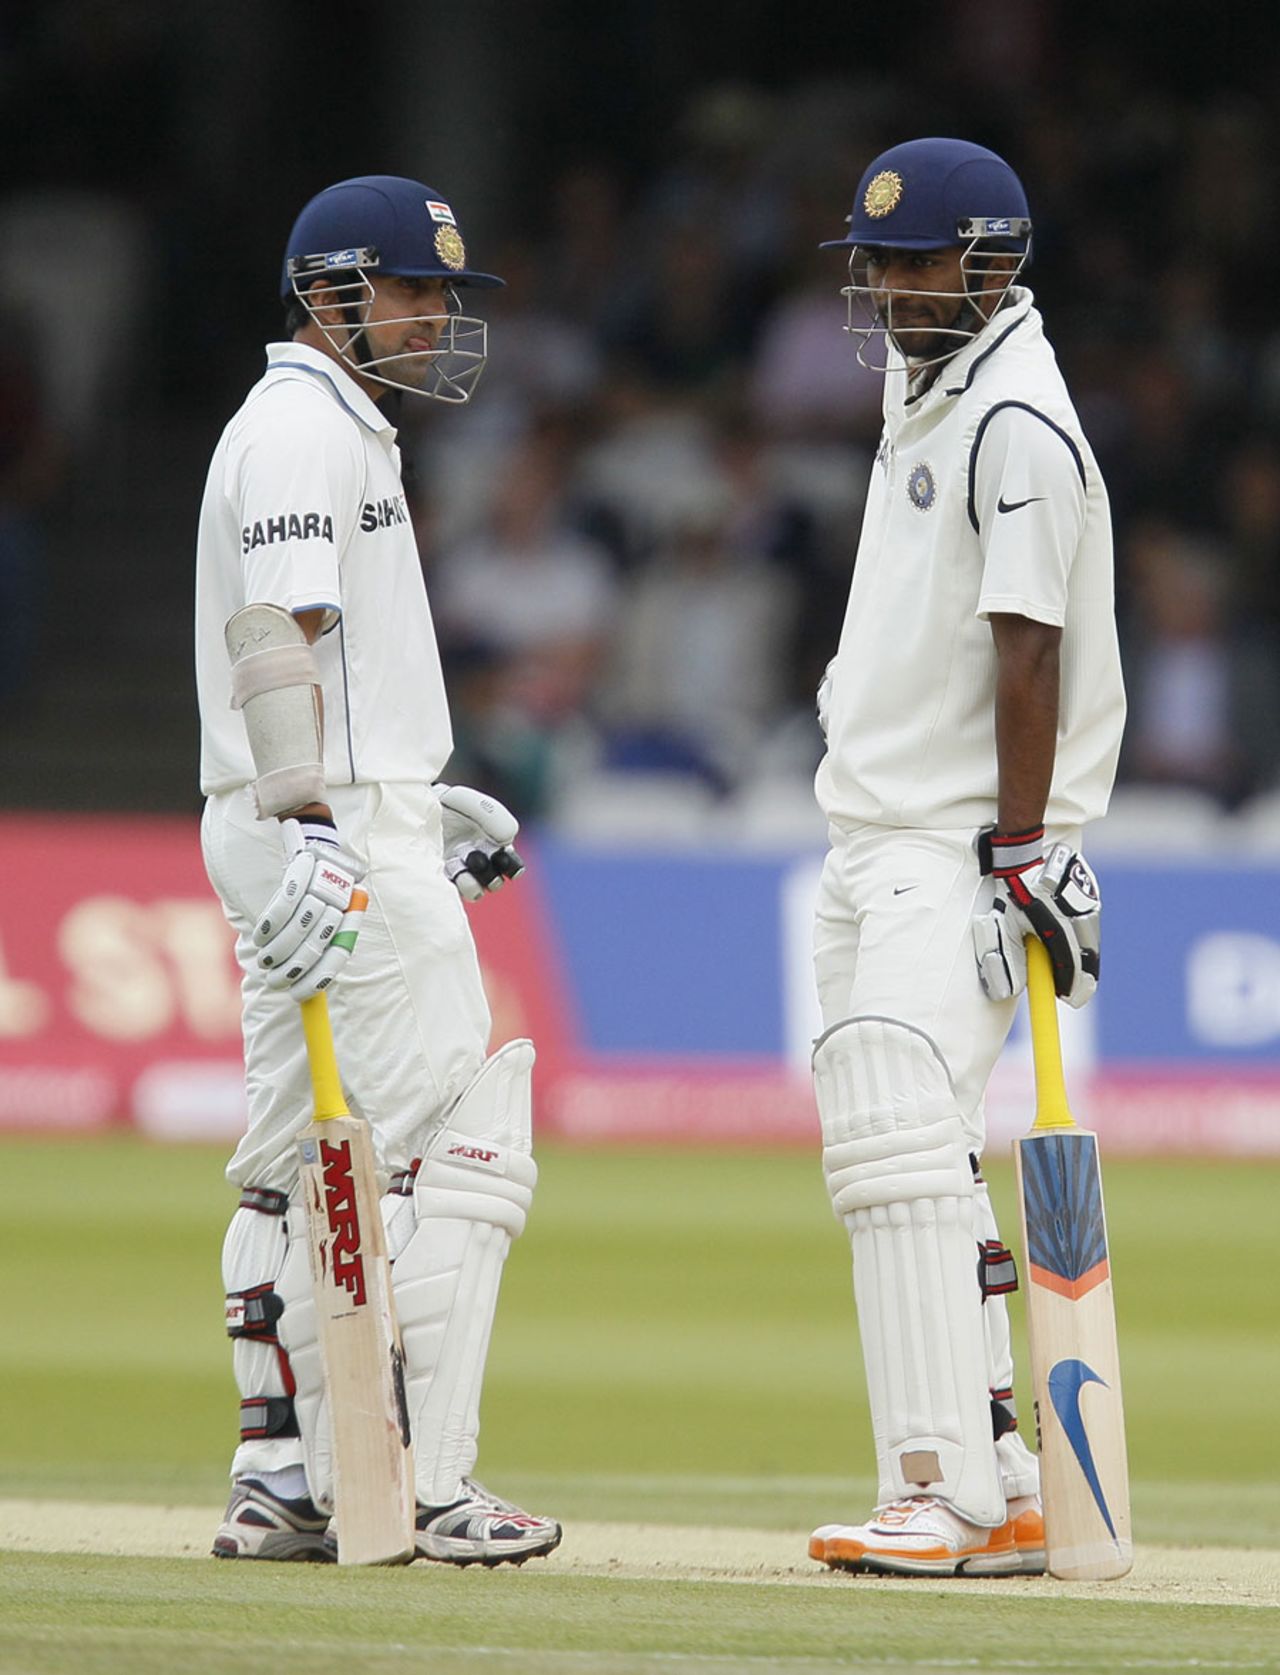 Gautam Gambhir and Abhinav Mukund put on 63 for the opening stand, England v India, 1st Test, Lord's, 3rd day, July 23, 2011